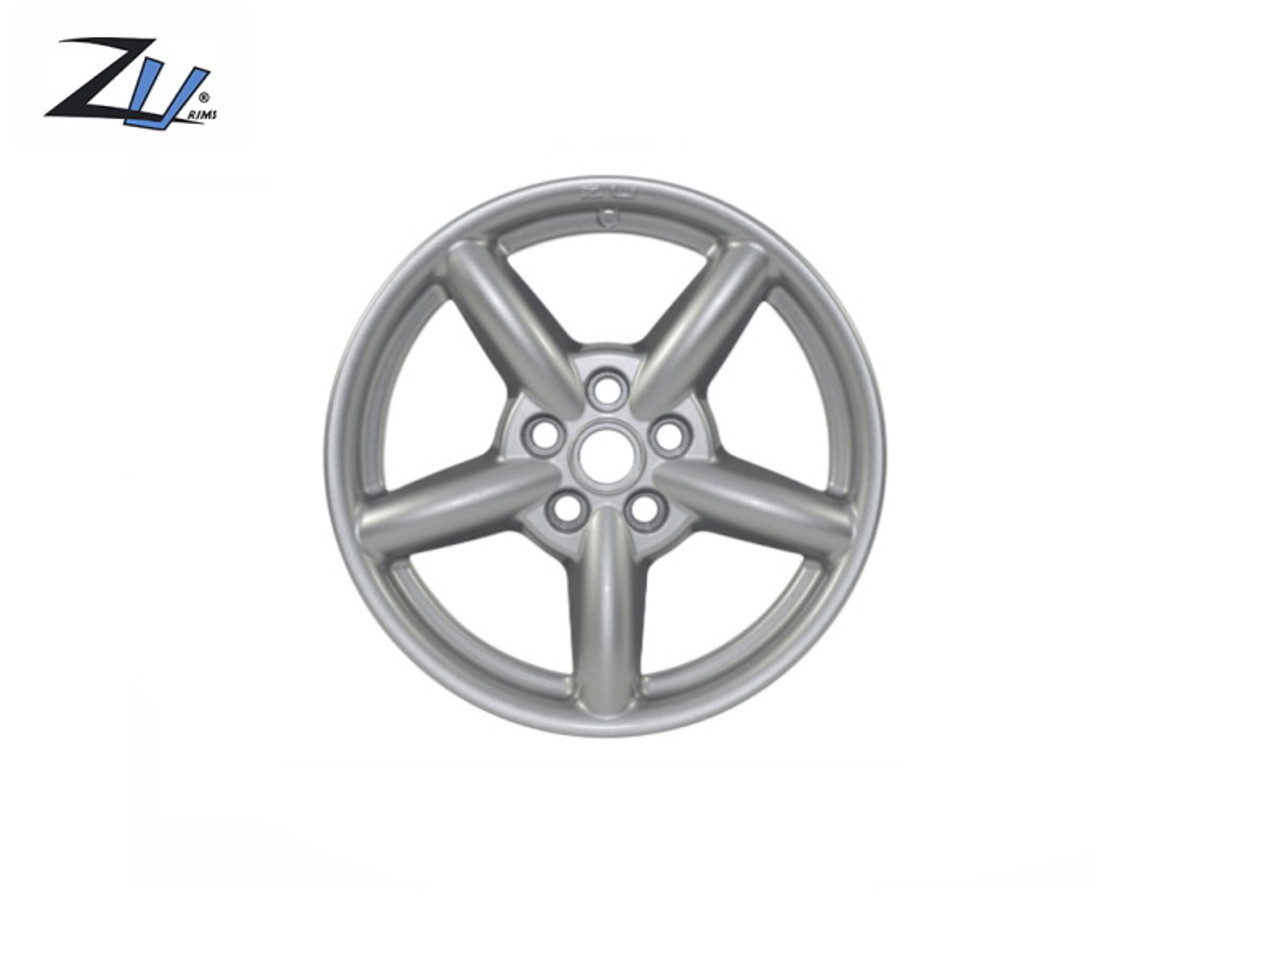 Zu Alloy Wheel Finished In Gloss Silver 18 x 8 With 5 x 120 Stud Pattern - DA2454